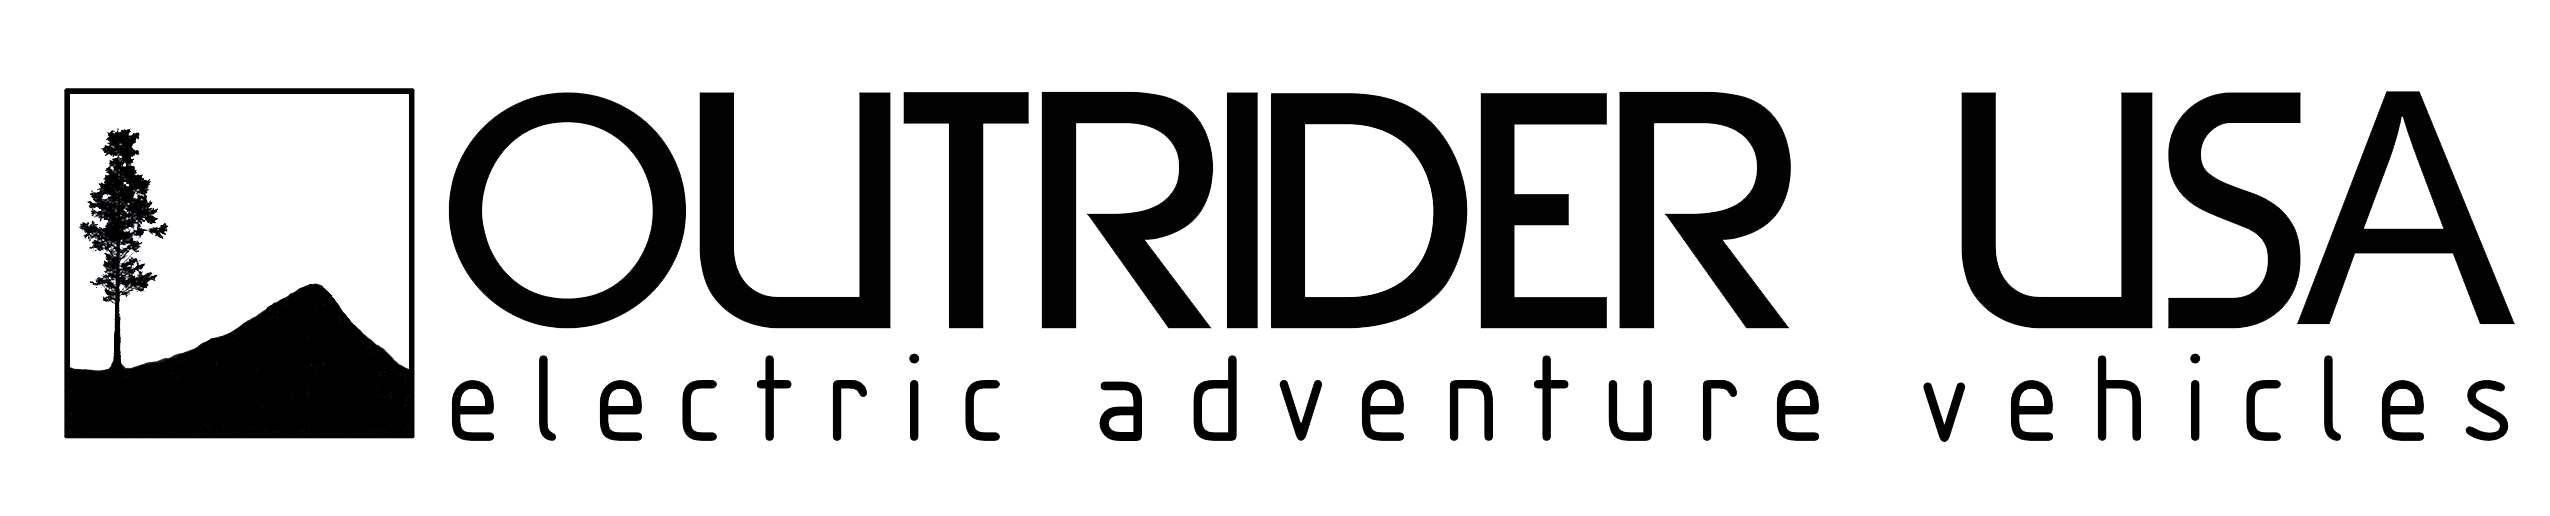 Outrider Electric Adventure Vehicles logo